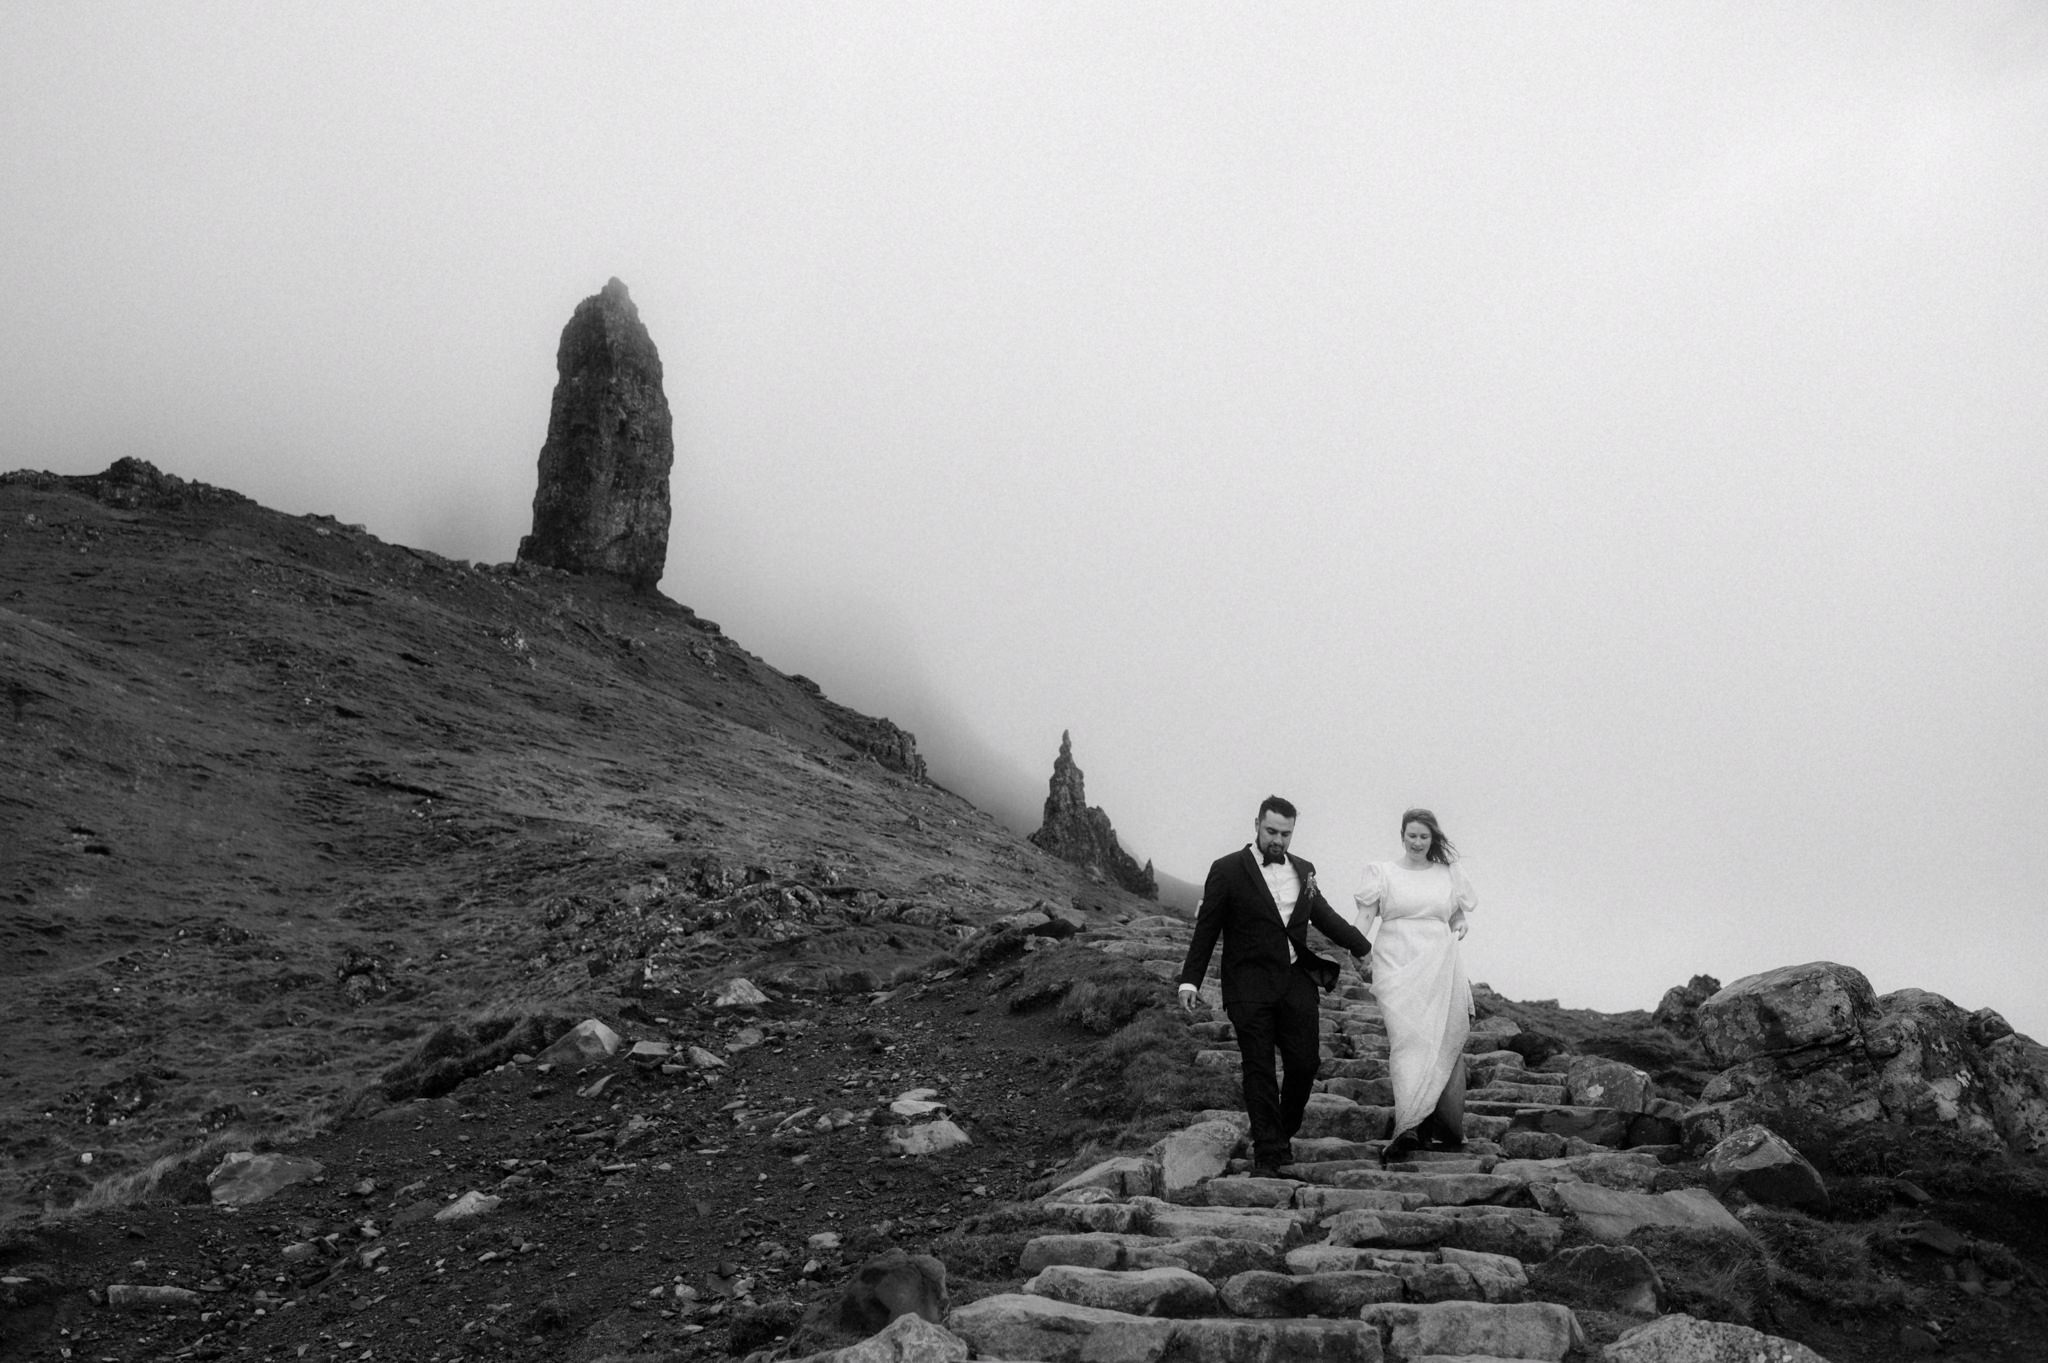 Scotland elopement photographer Sean Bell's image of Bride and Groom walking near Old man of Storr on Skye during their elopement